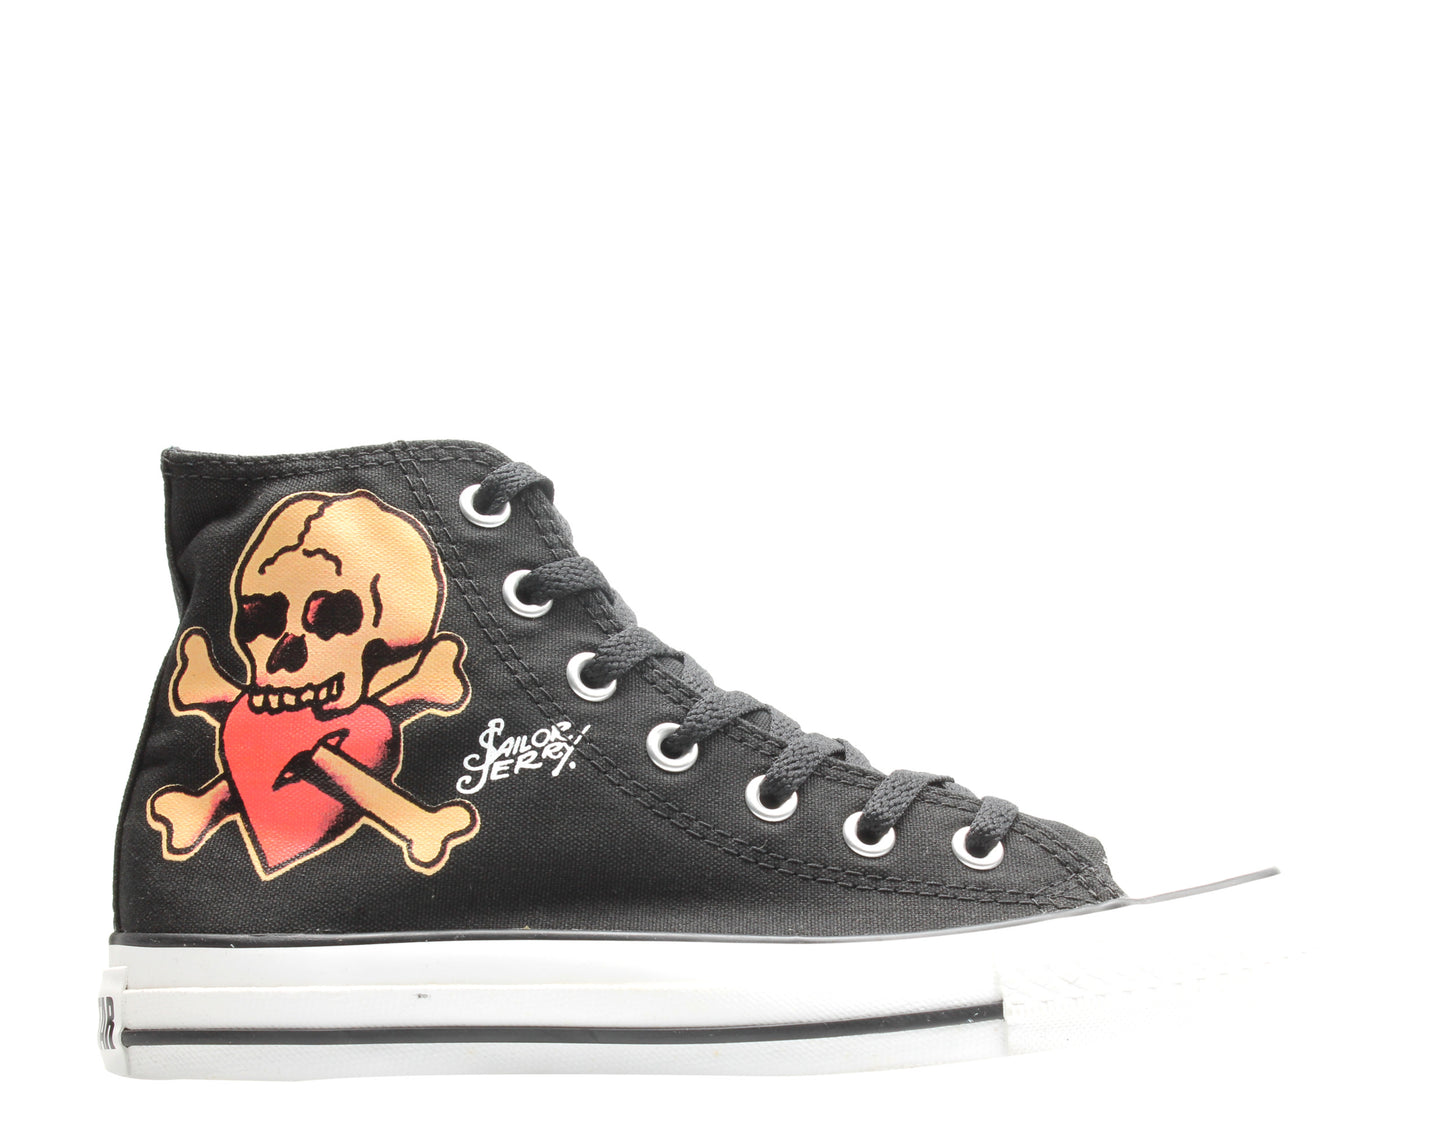 Converse Chuck Taylor All Star Sailor Jerry Skull Black High Top Sneakers 100181